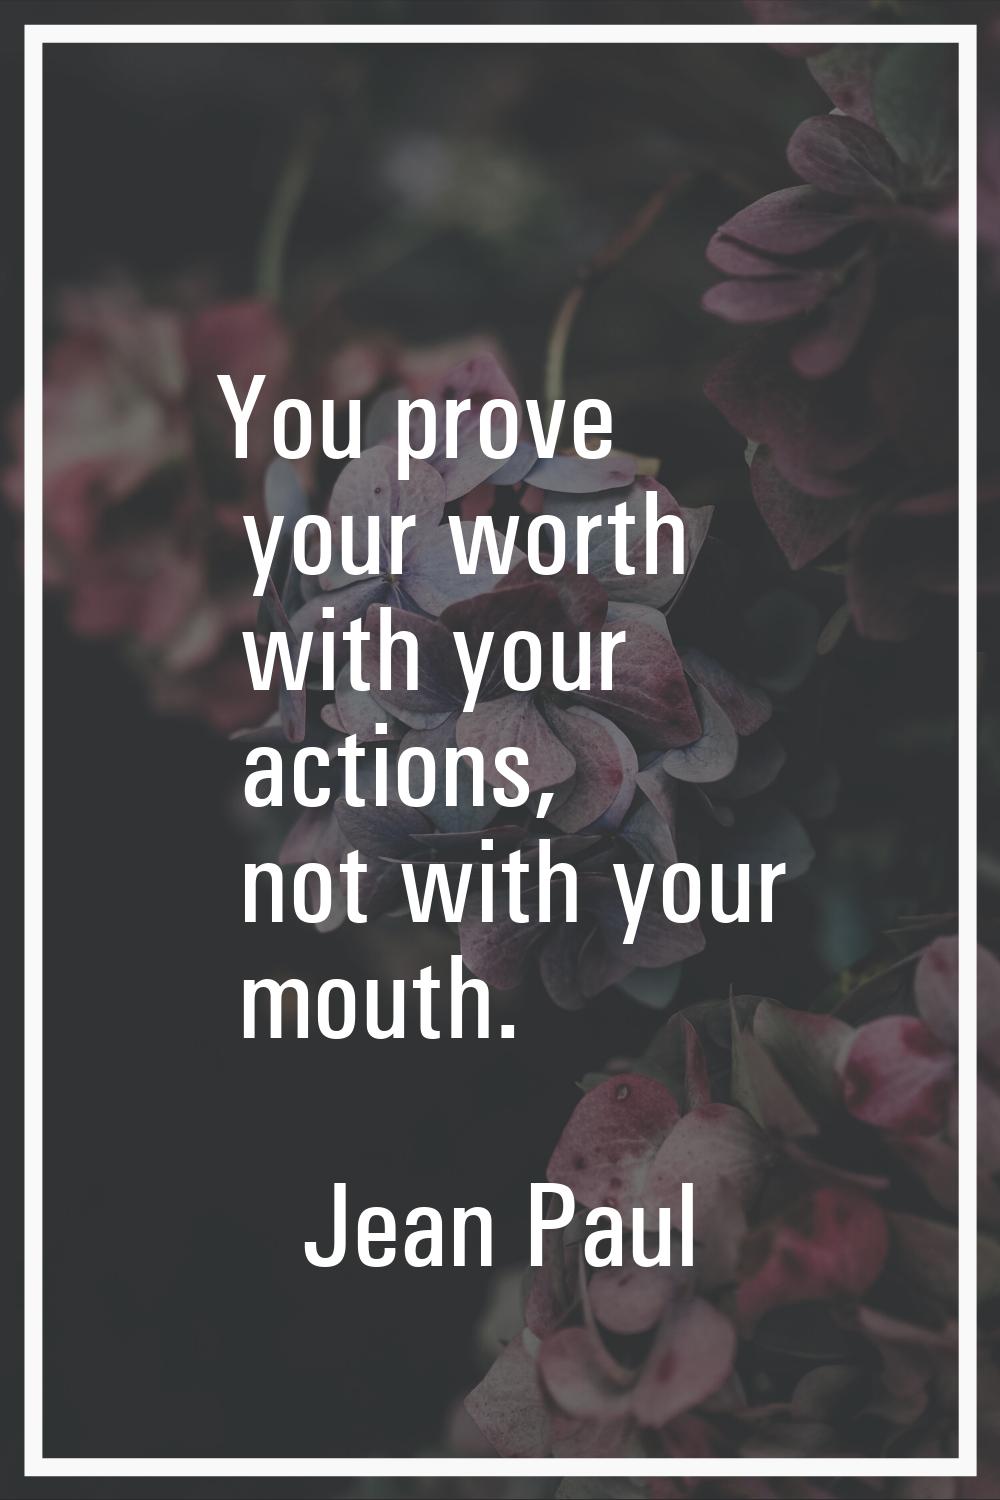 You prove your worth with your actions, not with your mouth.